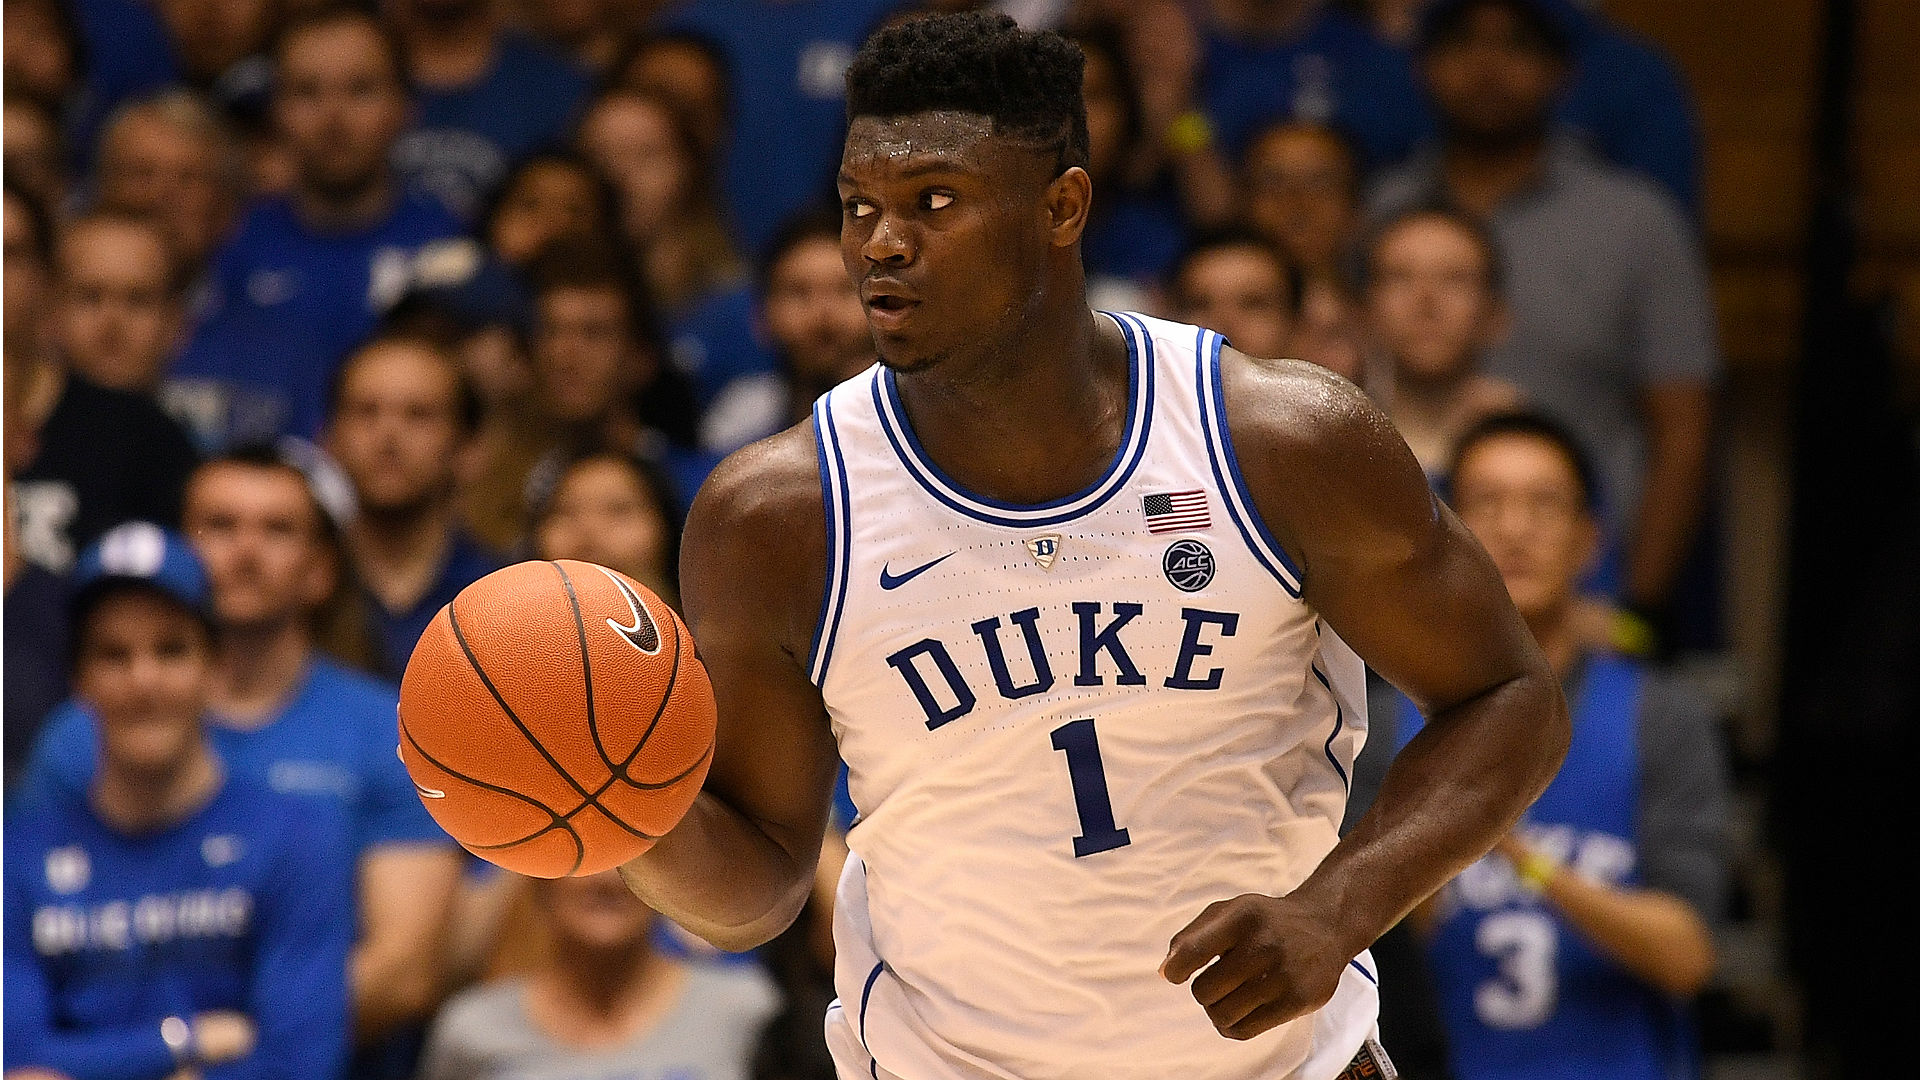 Add Stephen Curry to the list of NBA players who have been impressed by Zion Williamson.